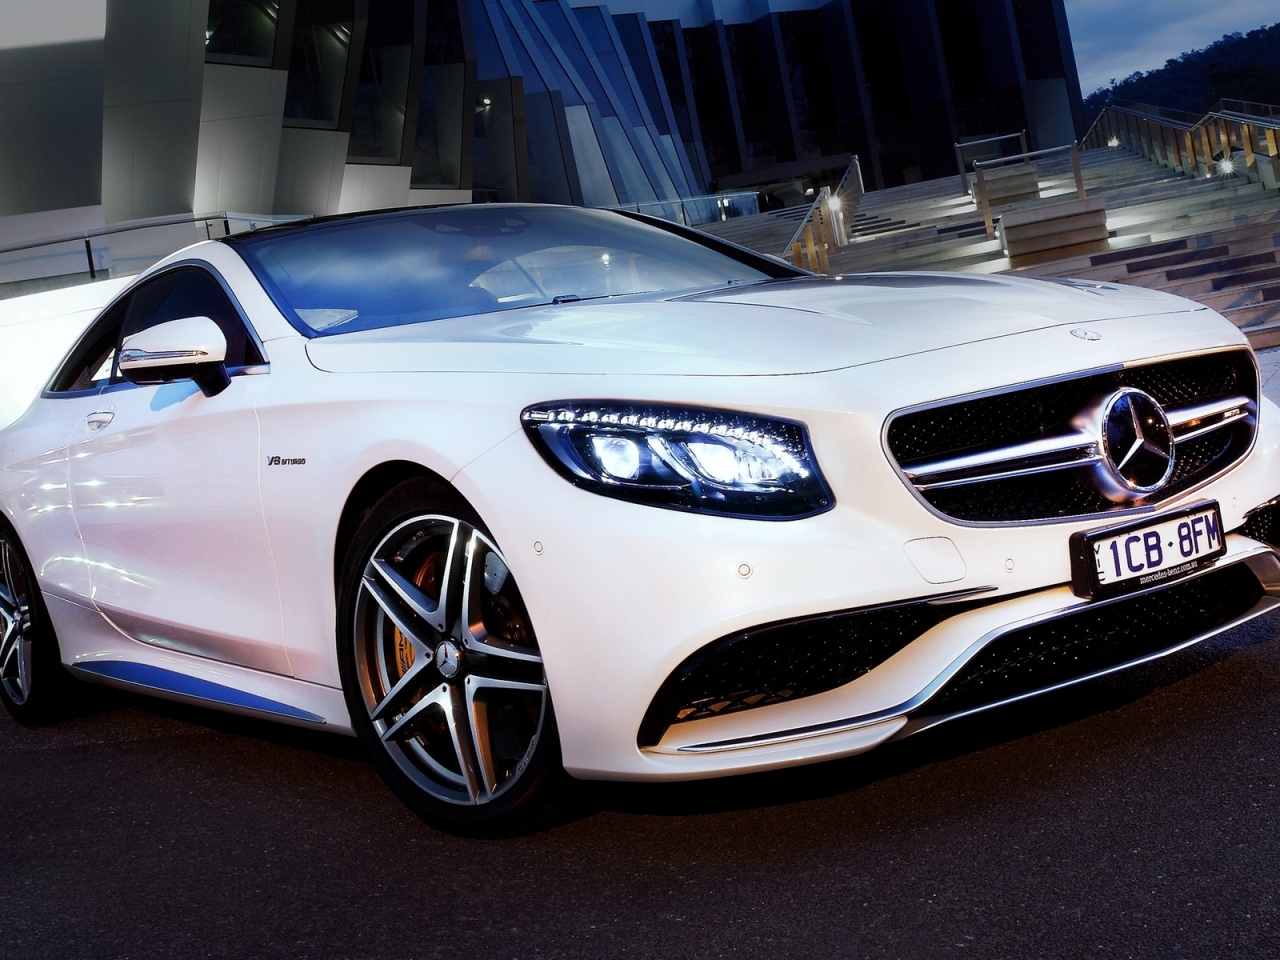 Mercedes Benz S63 AMG 2015 for 1280 x 960 resolution